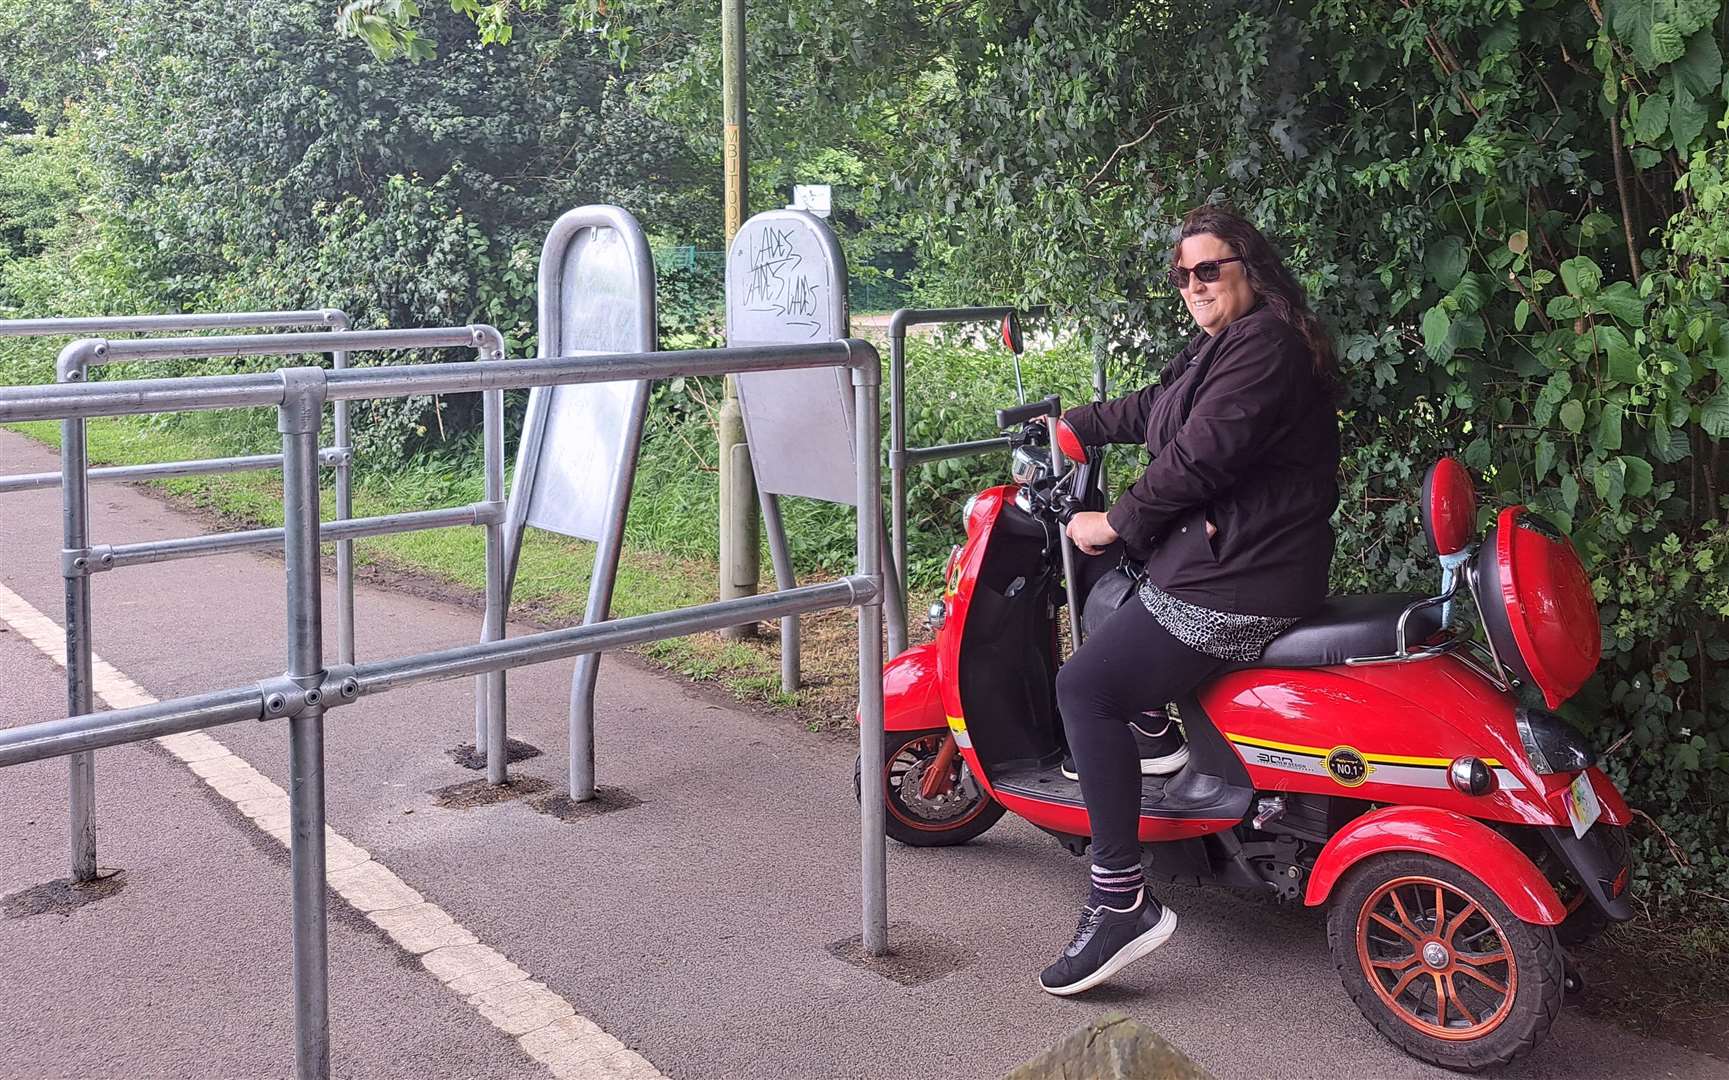 Ms Kellam's scooter is too wide to get through the barriers